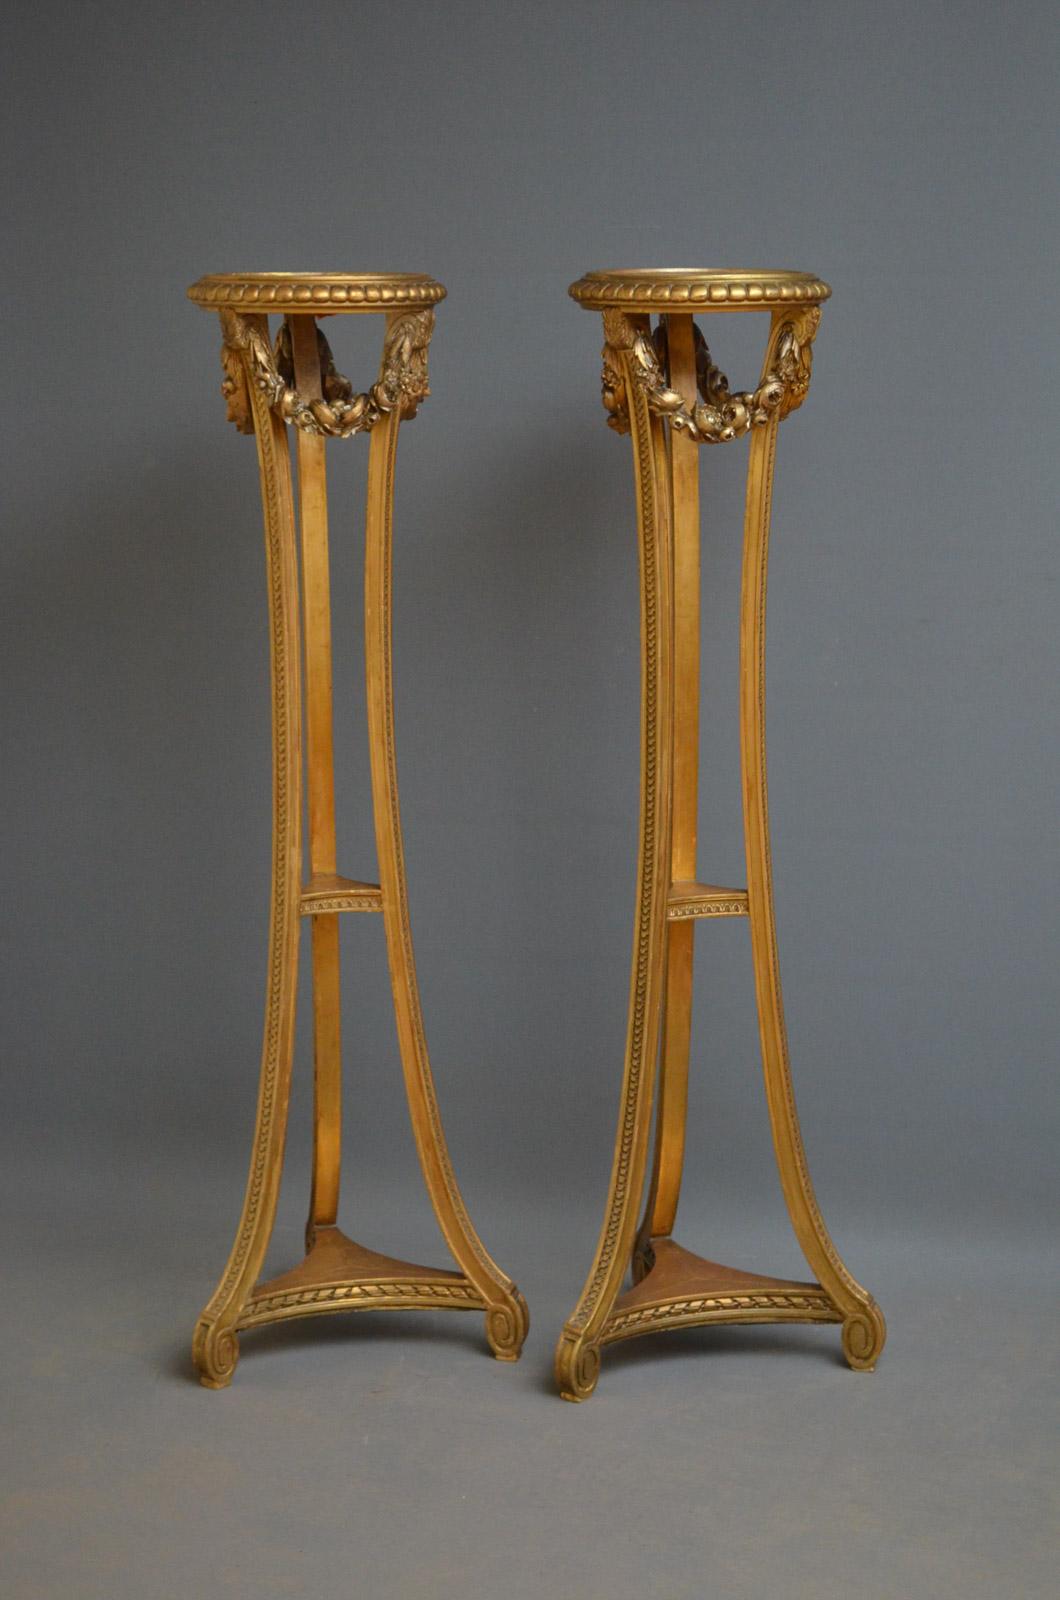 Late 19th Century Exceptional Pair of Giltwood Torchères